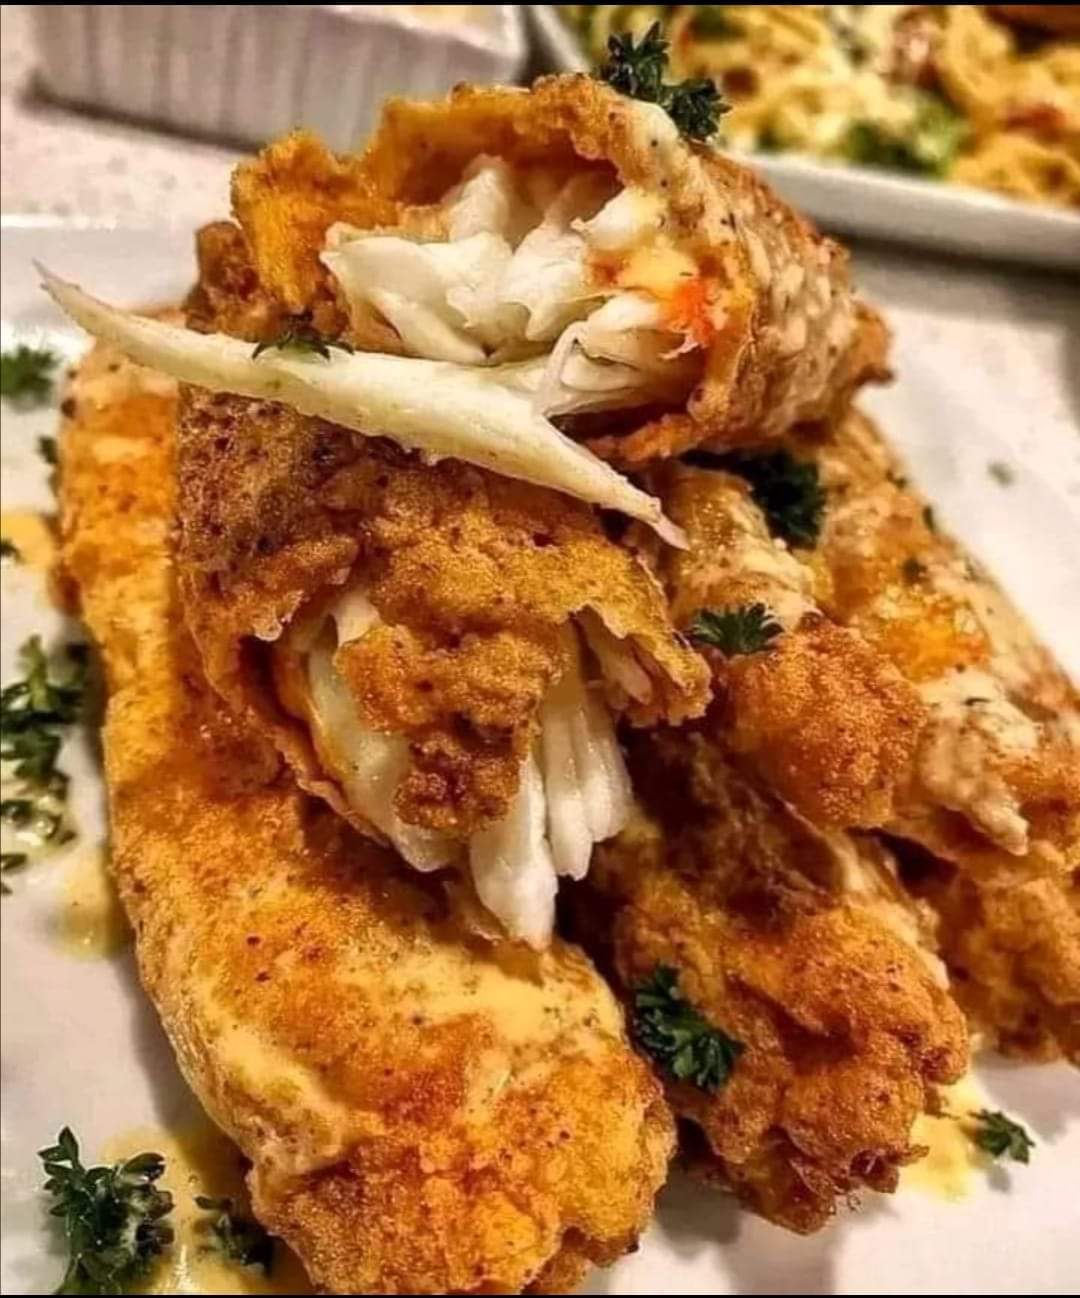 Fried king crab legs with garlic butter